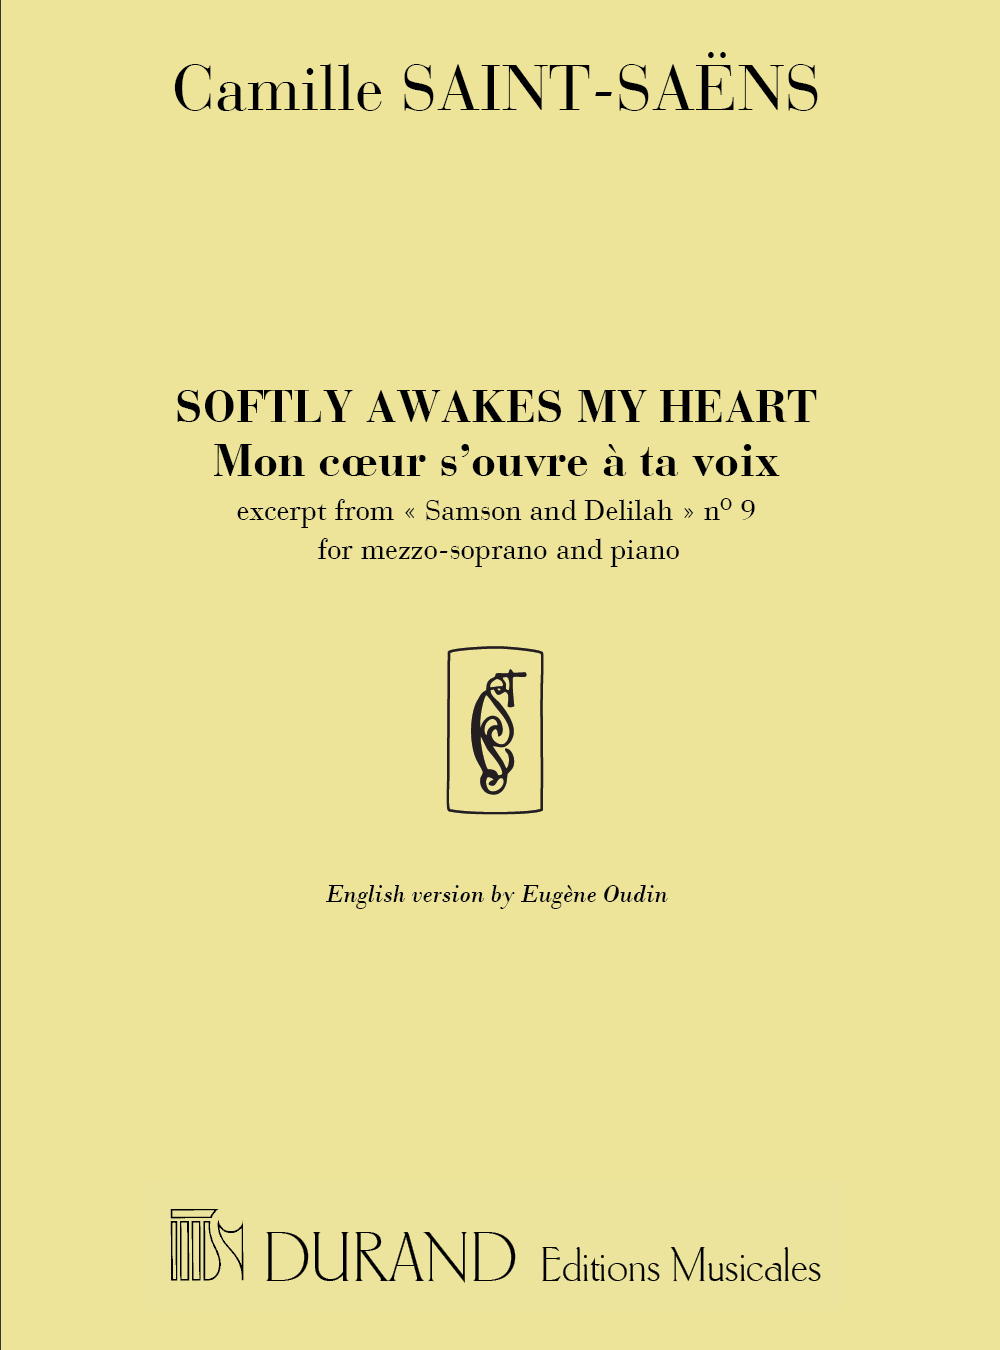 Camille Saint-Sans: Softly awakes my heart-Mon coeur s'ouvre  ta voix: Vocal